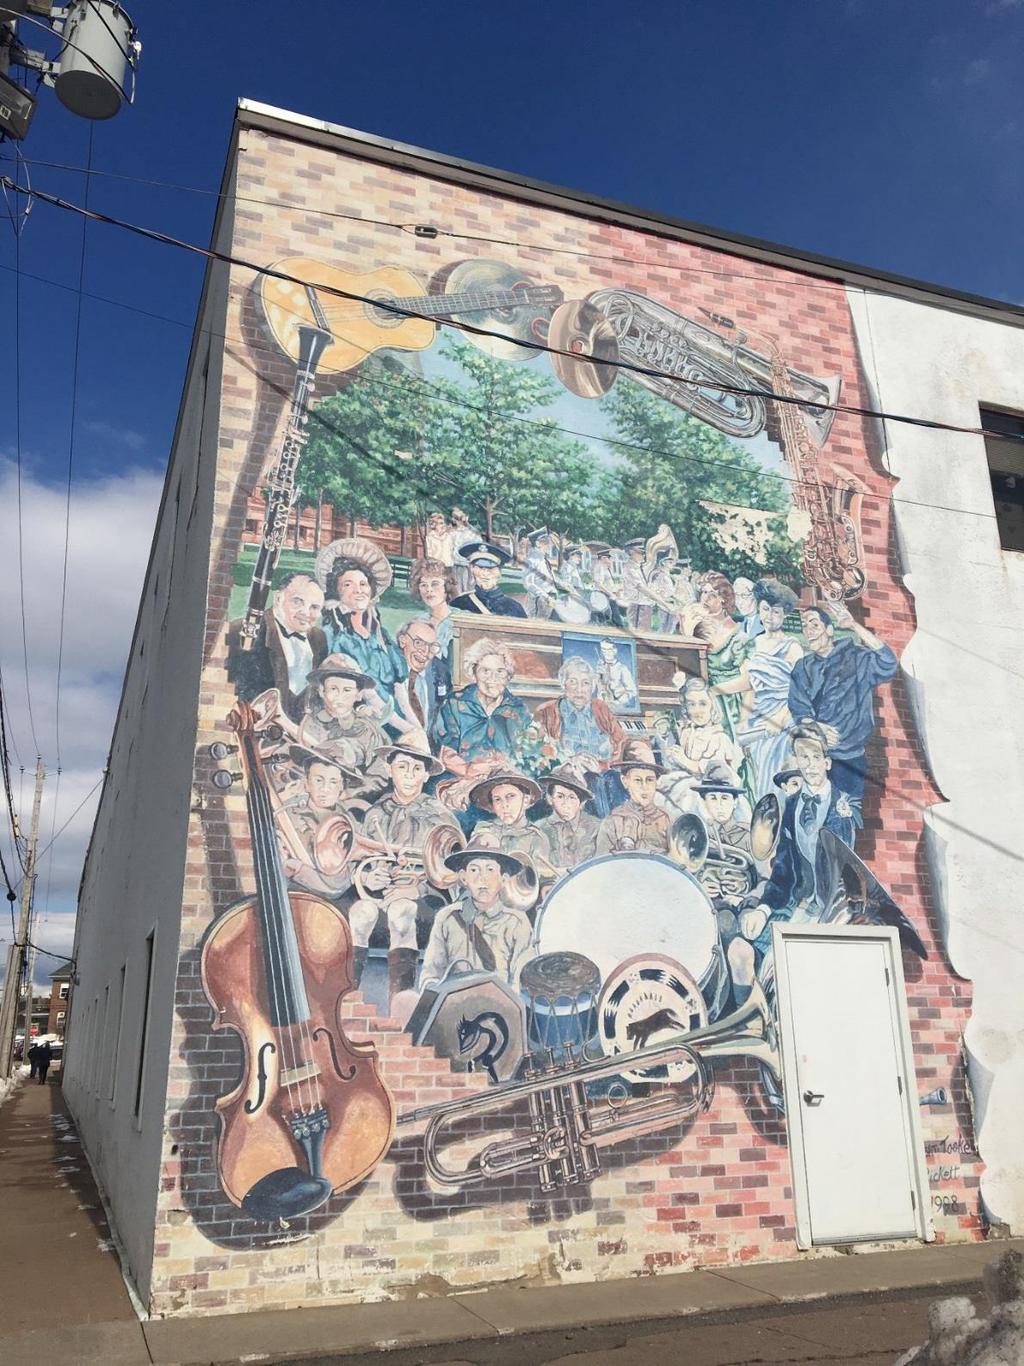 7) Music Mural Located on the back corner of the Service Canada building at 26 Prince Arthur Street, although it is best viewed from Princess St.